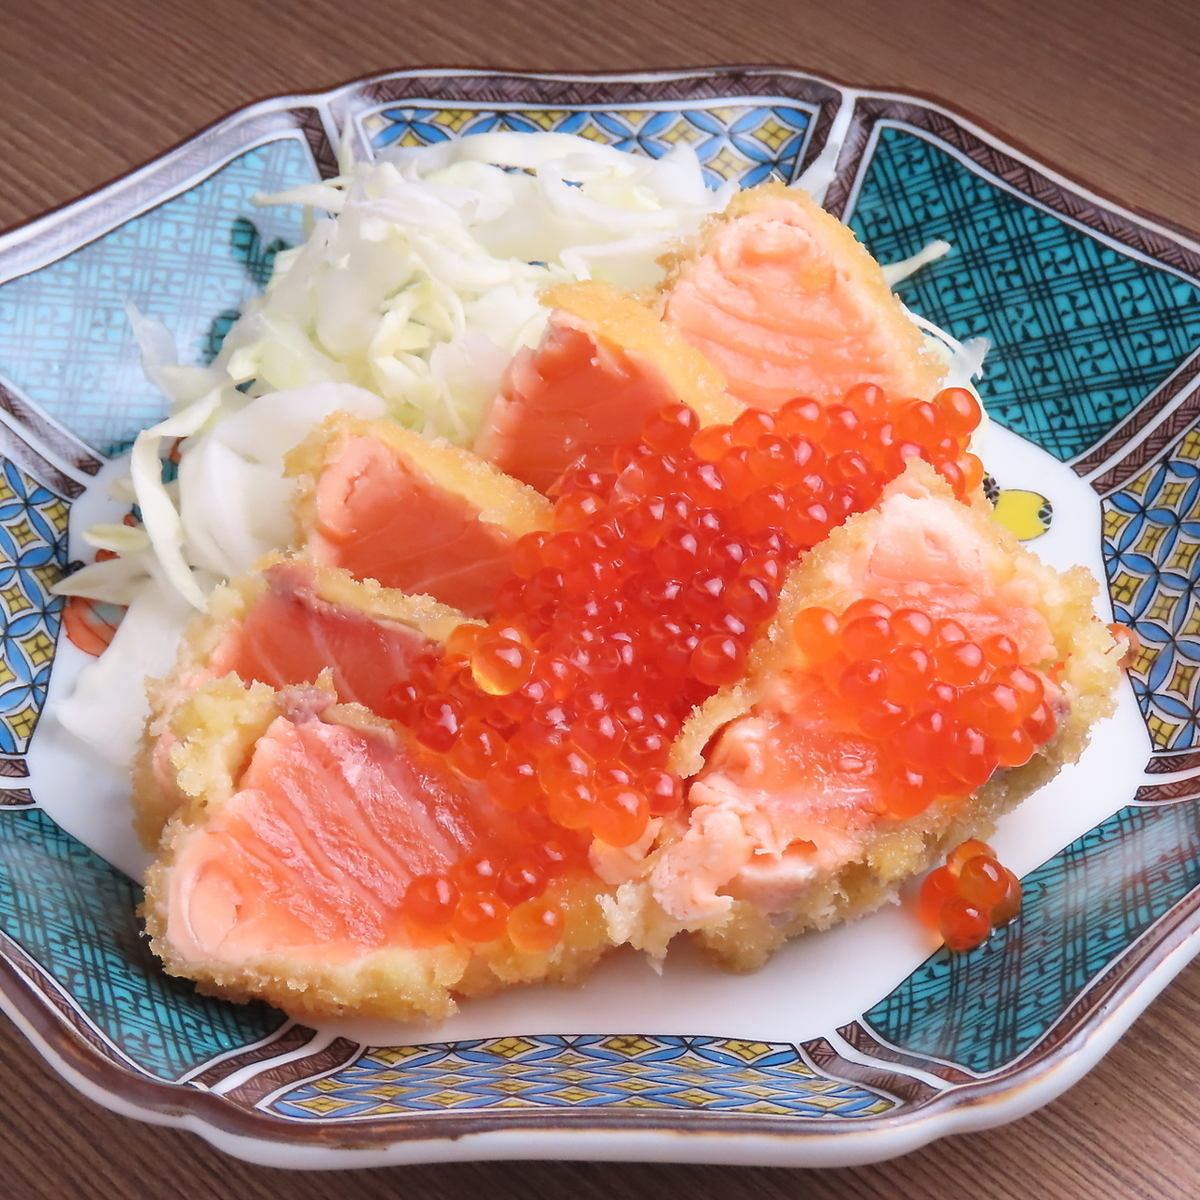 We offer a variety of dishes that make use of the bounty of the Hokuriku region!